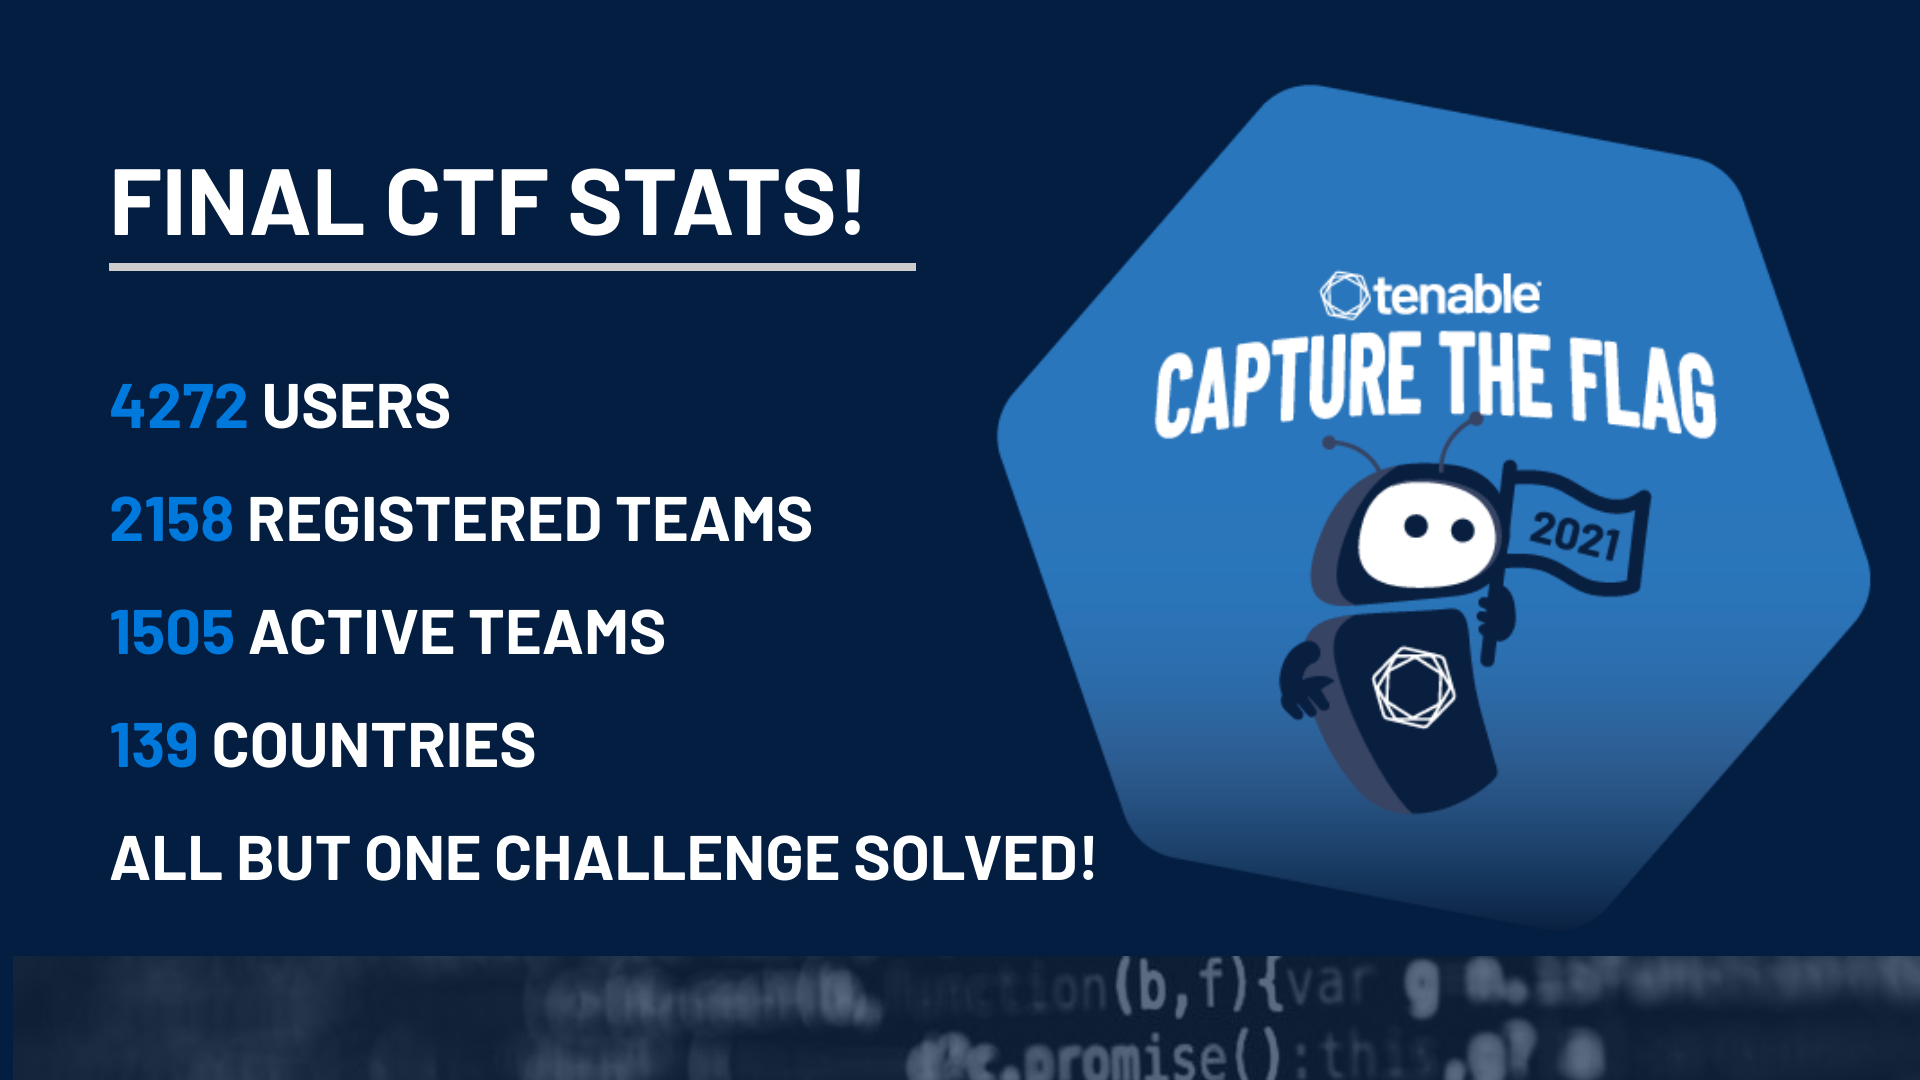 Final CTF Stats - Users, teams, countries